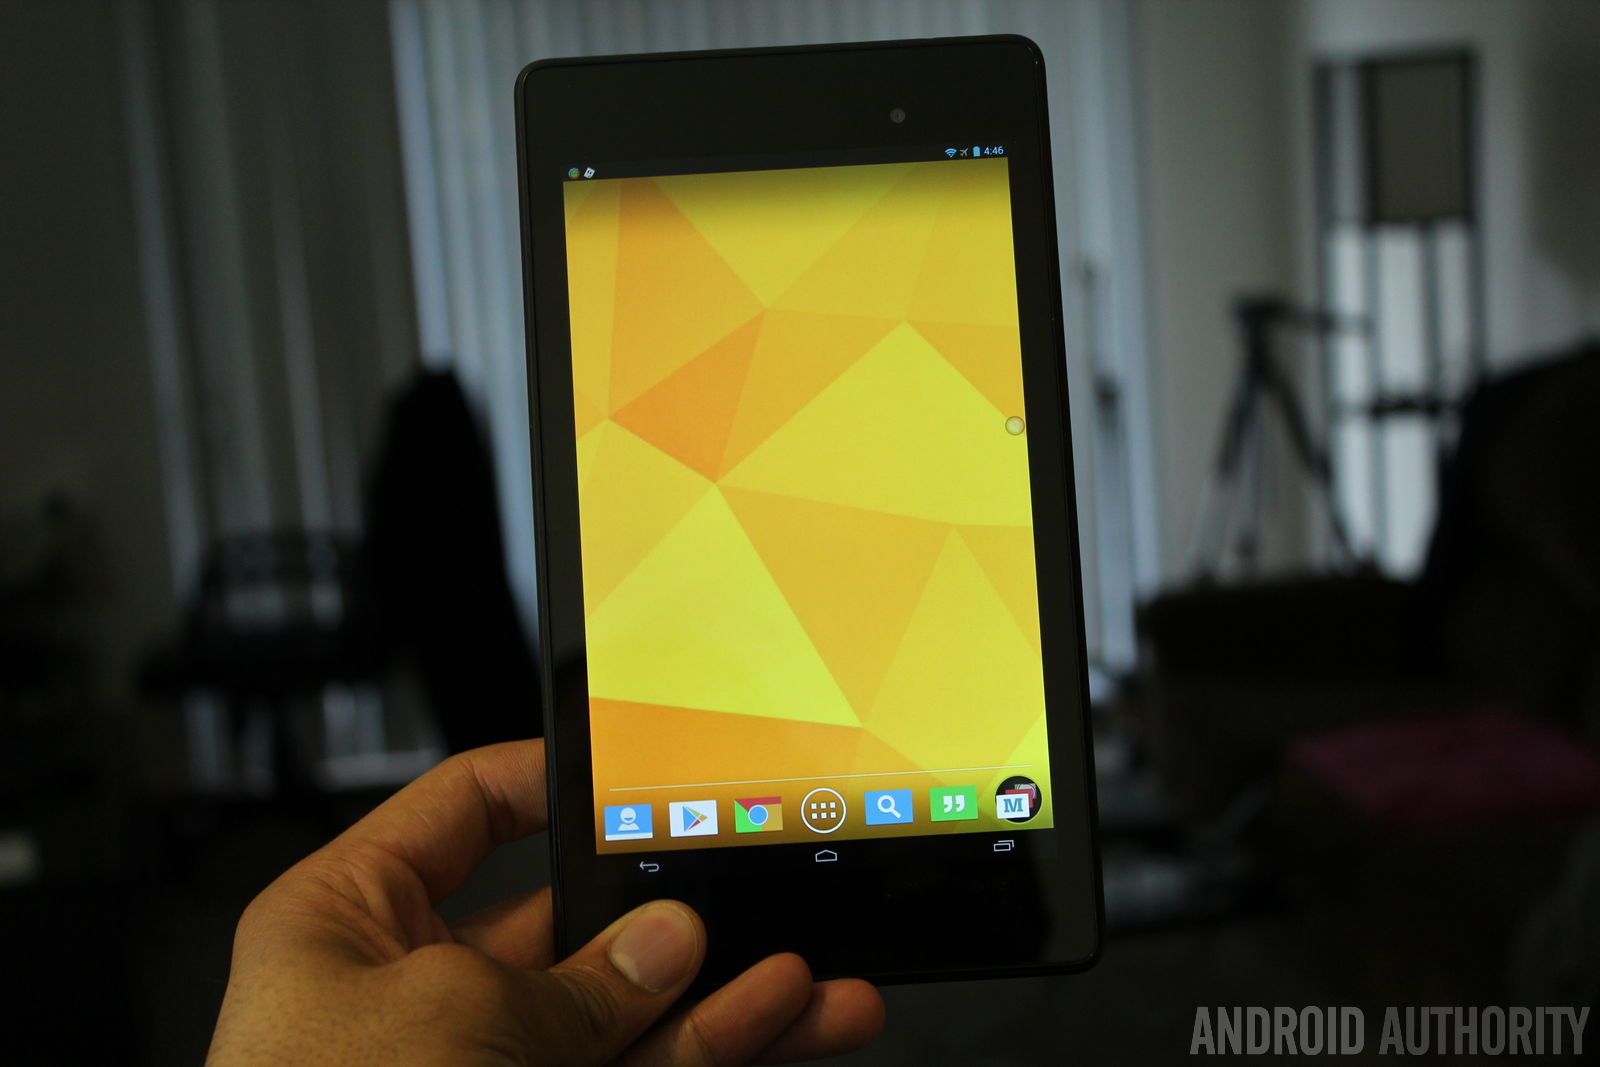 The new Nexus 7 remains the best value in its class.